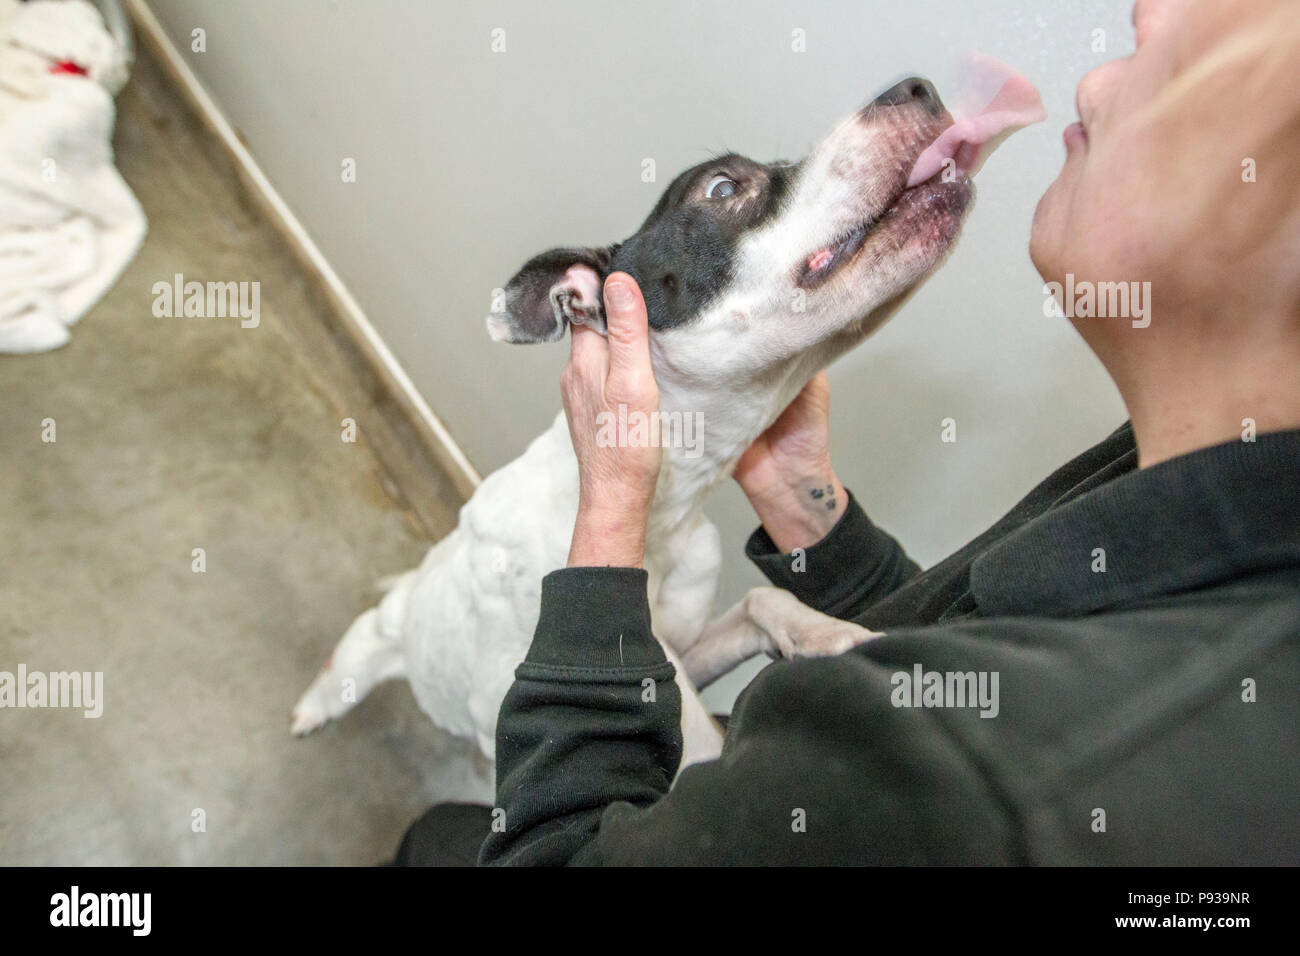 Abused dog getting cared for after rescue Stock Photo